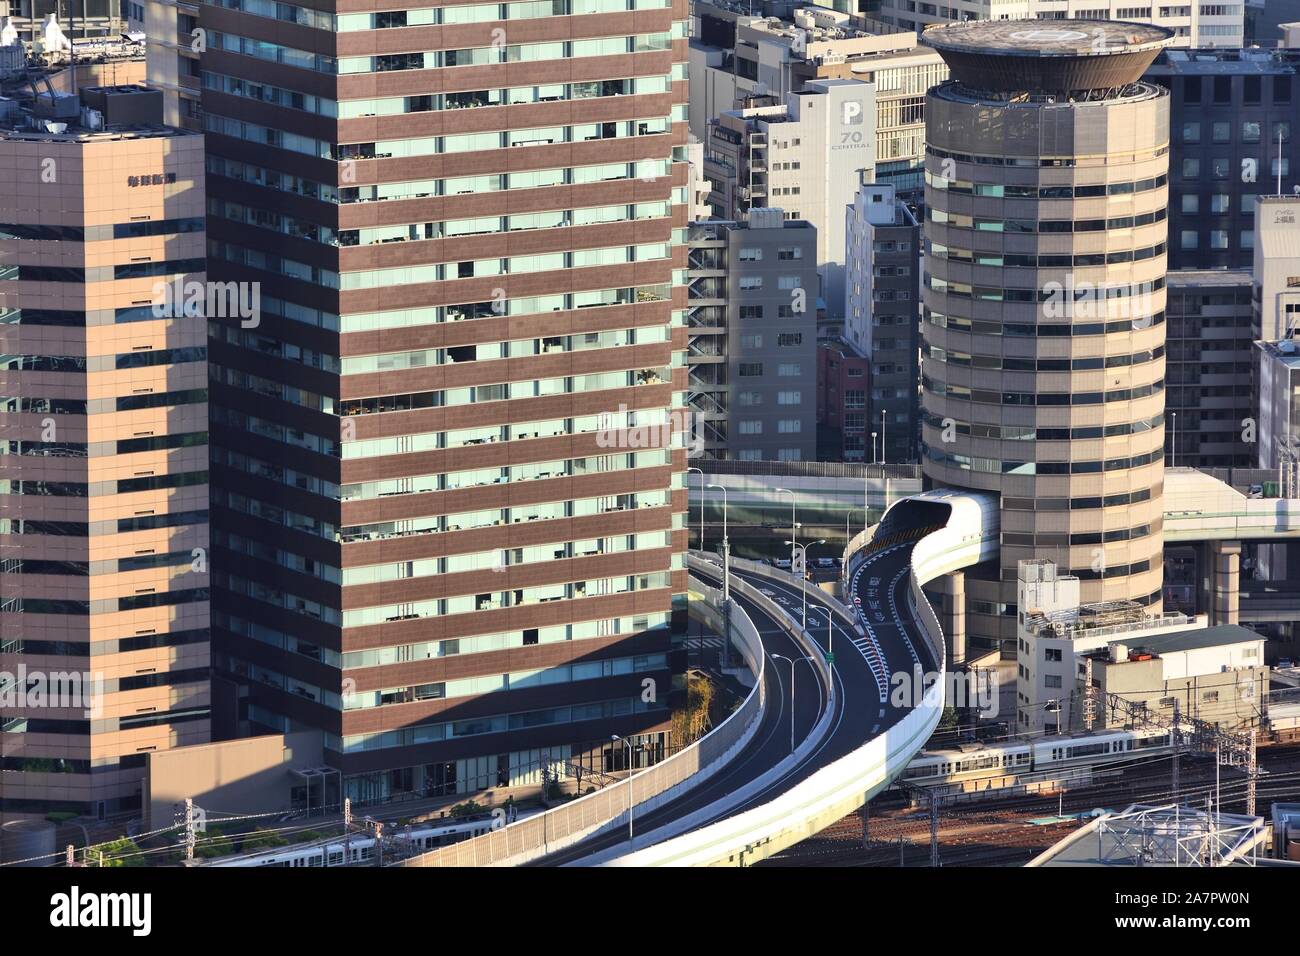 OSAKA, JAPAN - APRIL 27, 2012: Road goes through Gate Tower Building in Osaka, Japan. The building is extremely popular because of highway crossing th Stock Photo